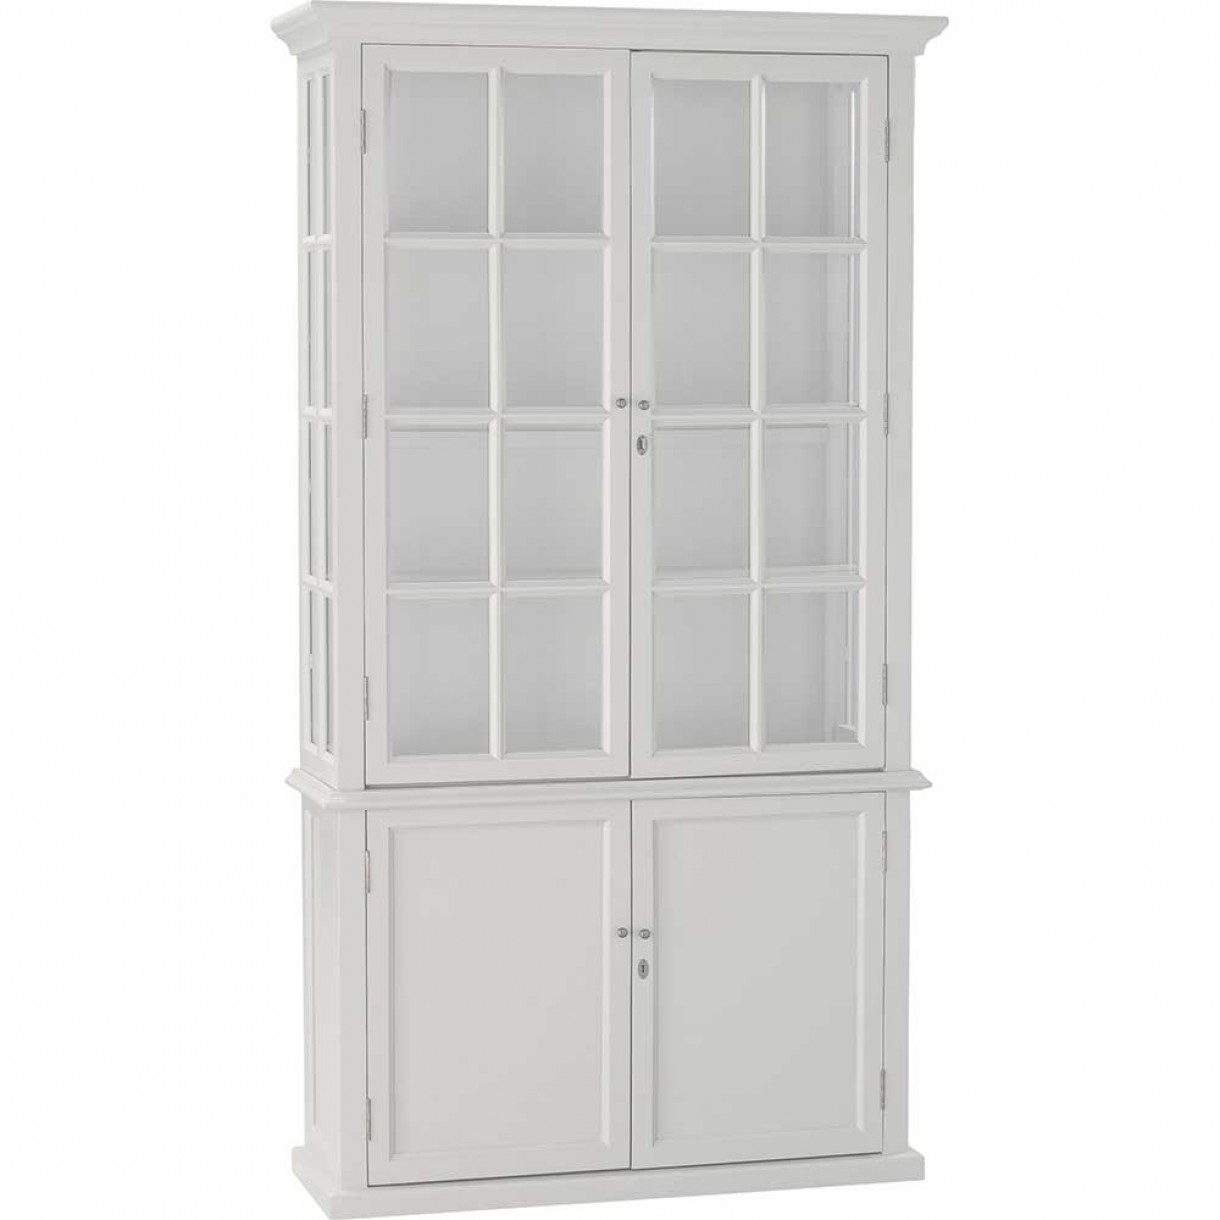 Display Cabinets Nz 31 With Display Cabinets Nz Edgarpoe intended for size 1220 X 1220